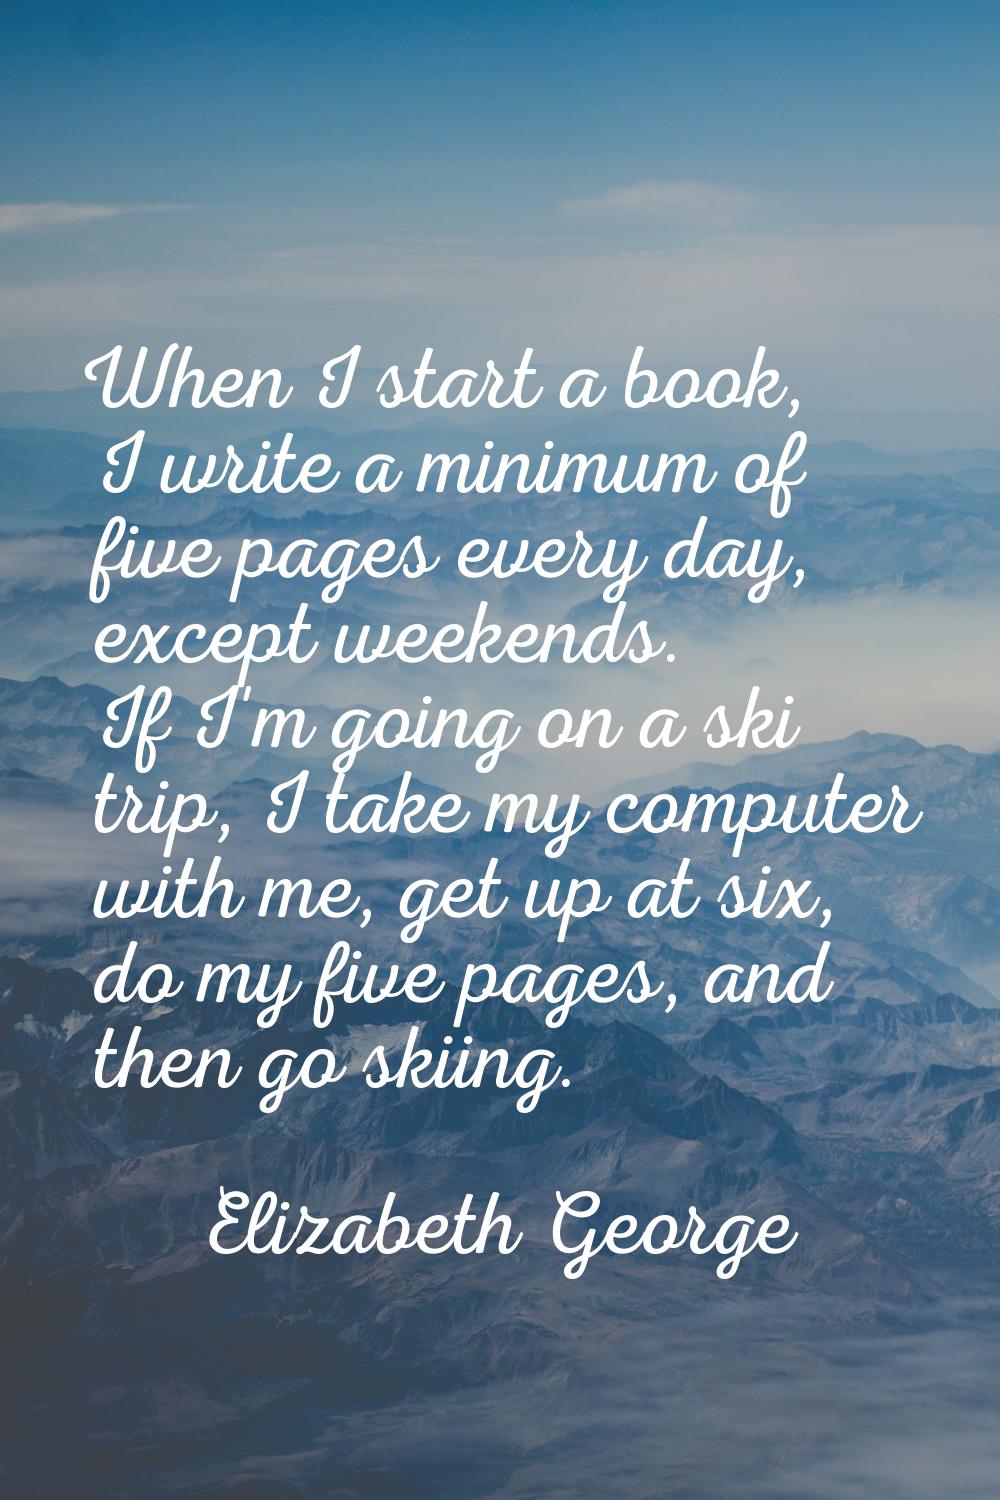 When I start a book, I write a minimum of five pages every day, except weekends. If I'm going on a 